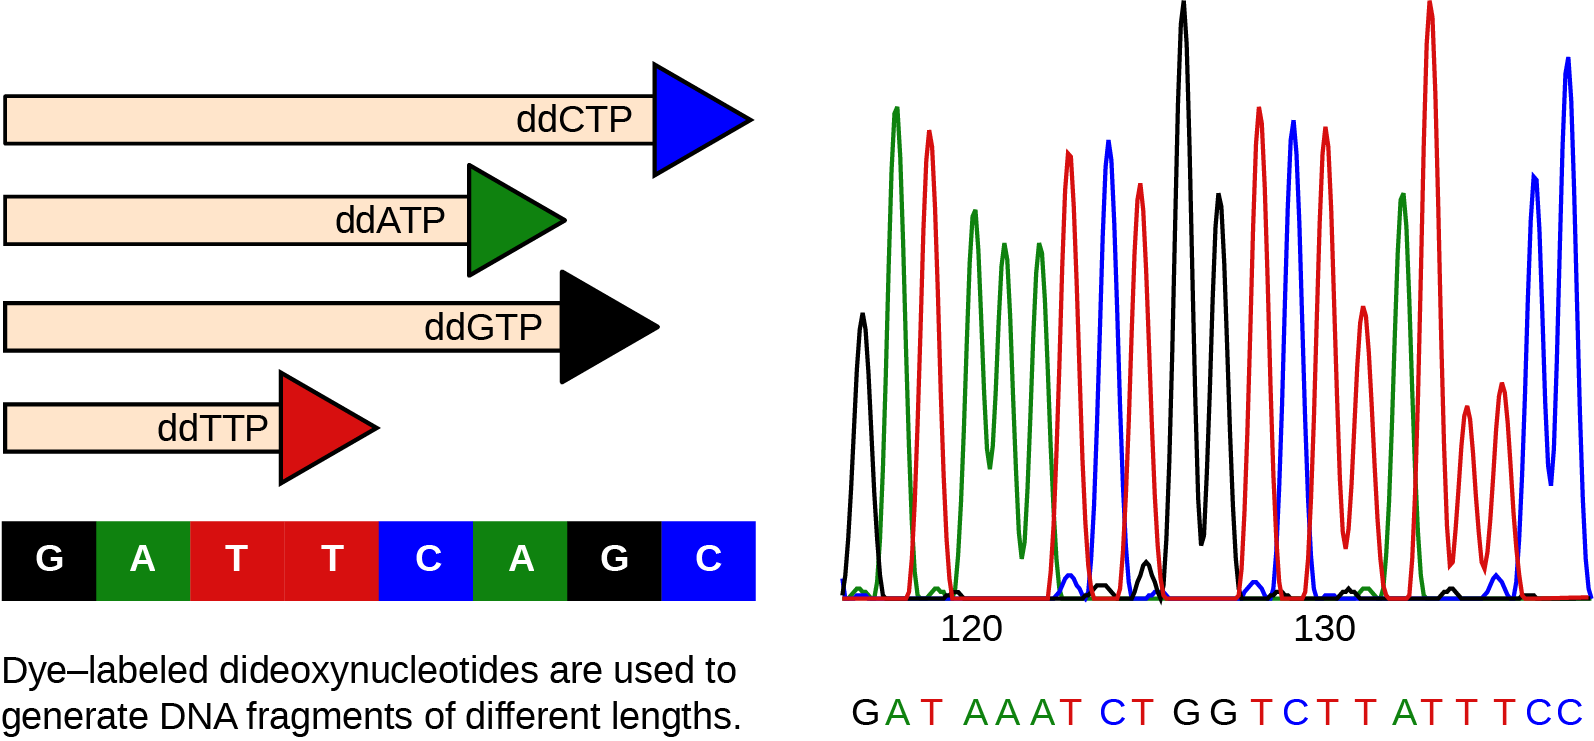 The left part of this illustration shows a parent strand of D N A with the sequence G A T T C A G C, and four daughter strands, each of which was made in the presence of a different dideoxynucleotide: lower case d lower case d upper case A upper case T upper case P, and lower case d lower case d upper case C upper case T upper case P, and lower d lower d upper G upper T upper P, or lower d lower d upper T upper T upper P. The growing chain terminates when a lower d lower d upper N T P is incorporated, resulting in daughter strands of different lengths. The right part of this image shows the separation of the D N A fragments on the basis of size. Each lower d lower d upper N T P is fluorescently labeled with a different color so that the sequence can be read by the size of each fragment and its color.